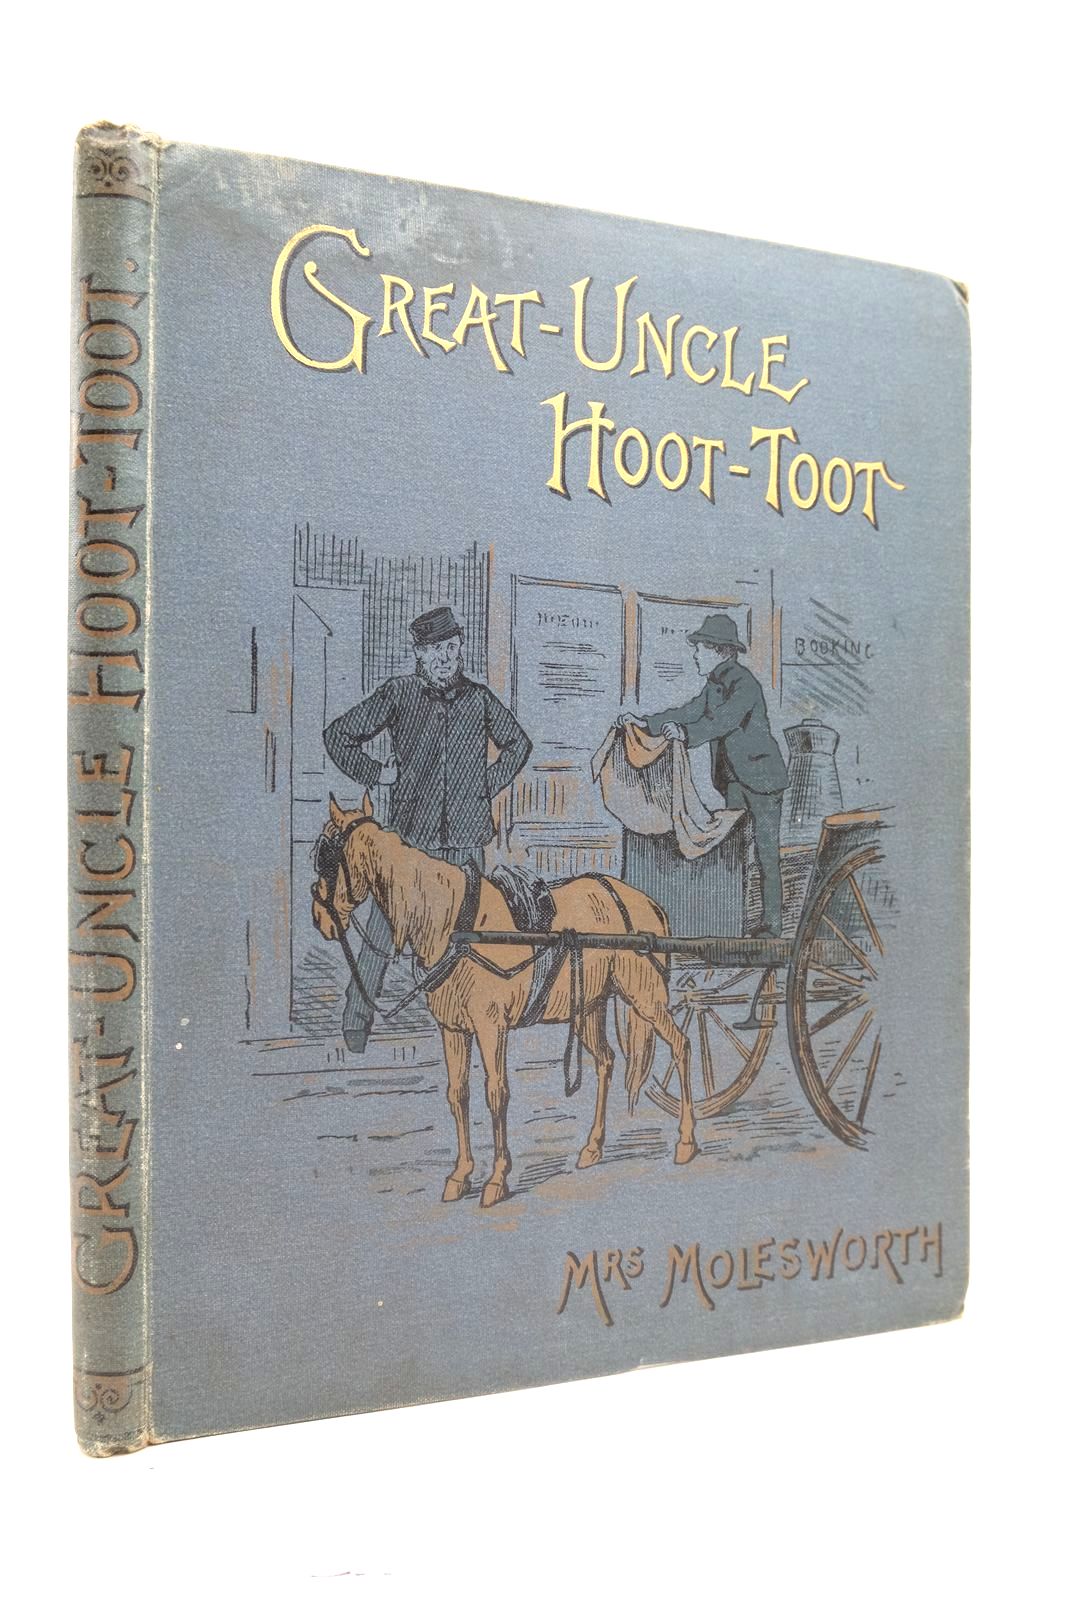 Photo of GREAT-UNCLE HOOT-TOOT- Stock Number: 2140038